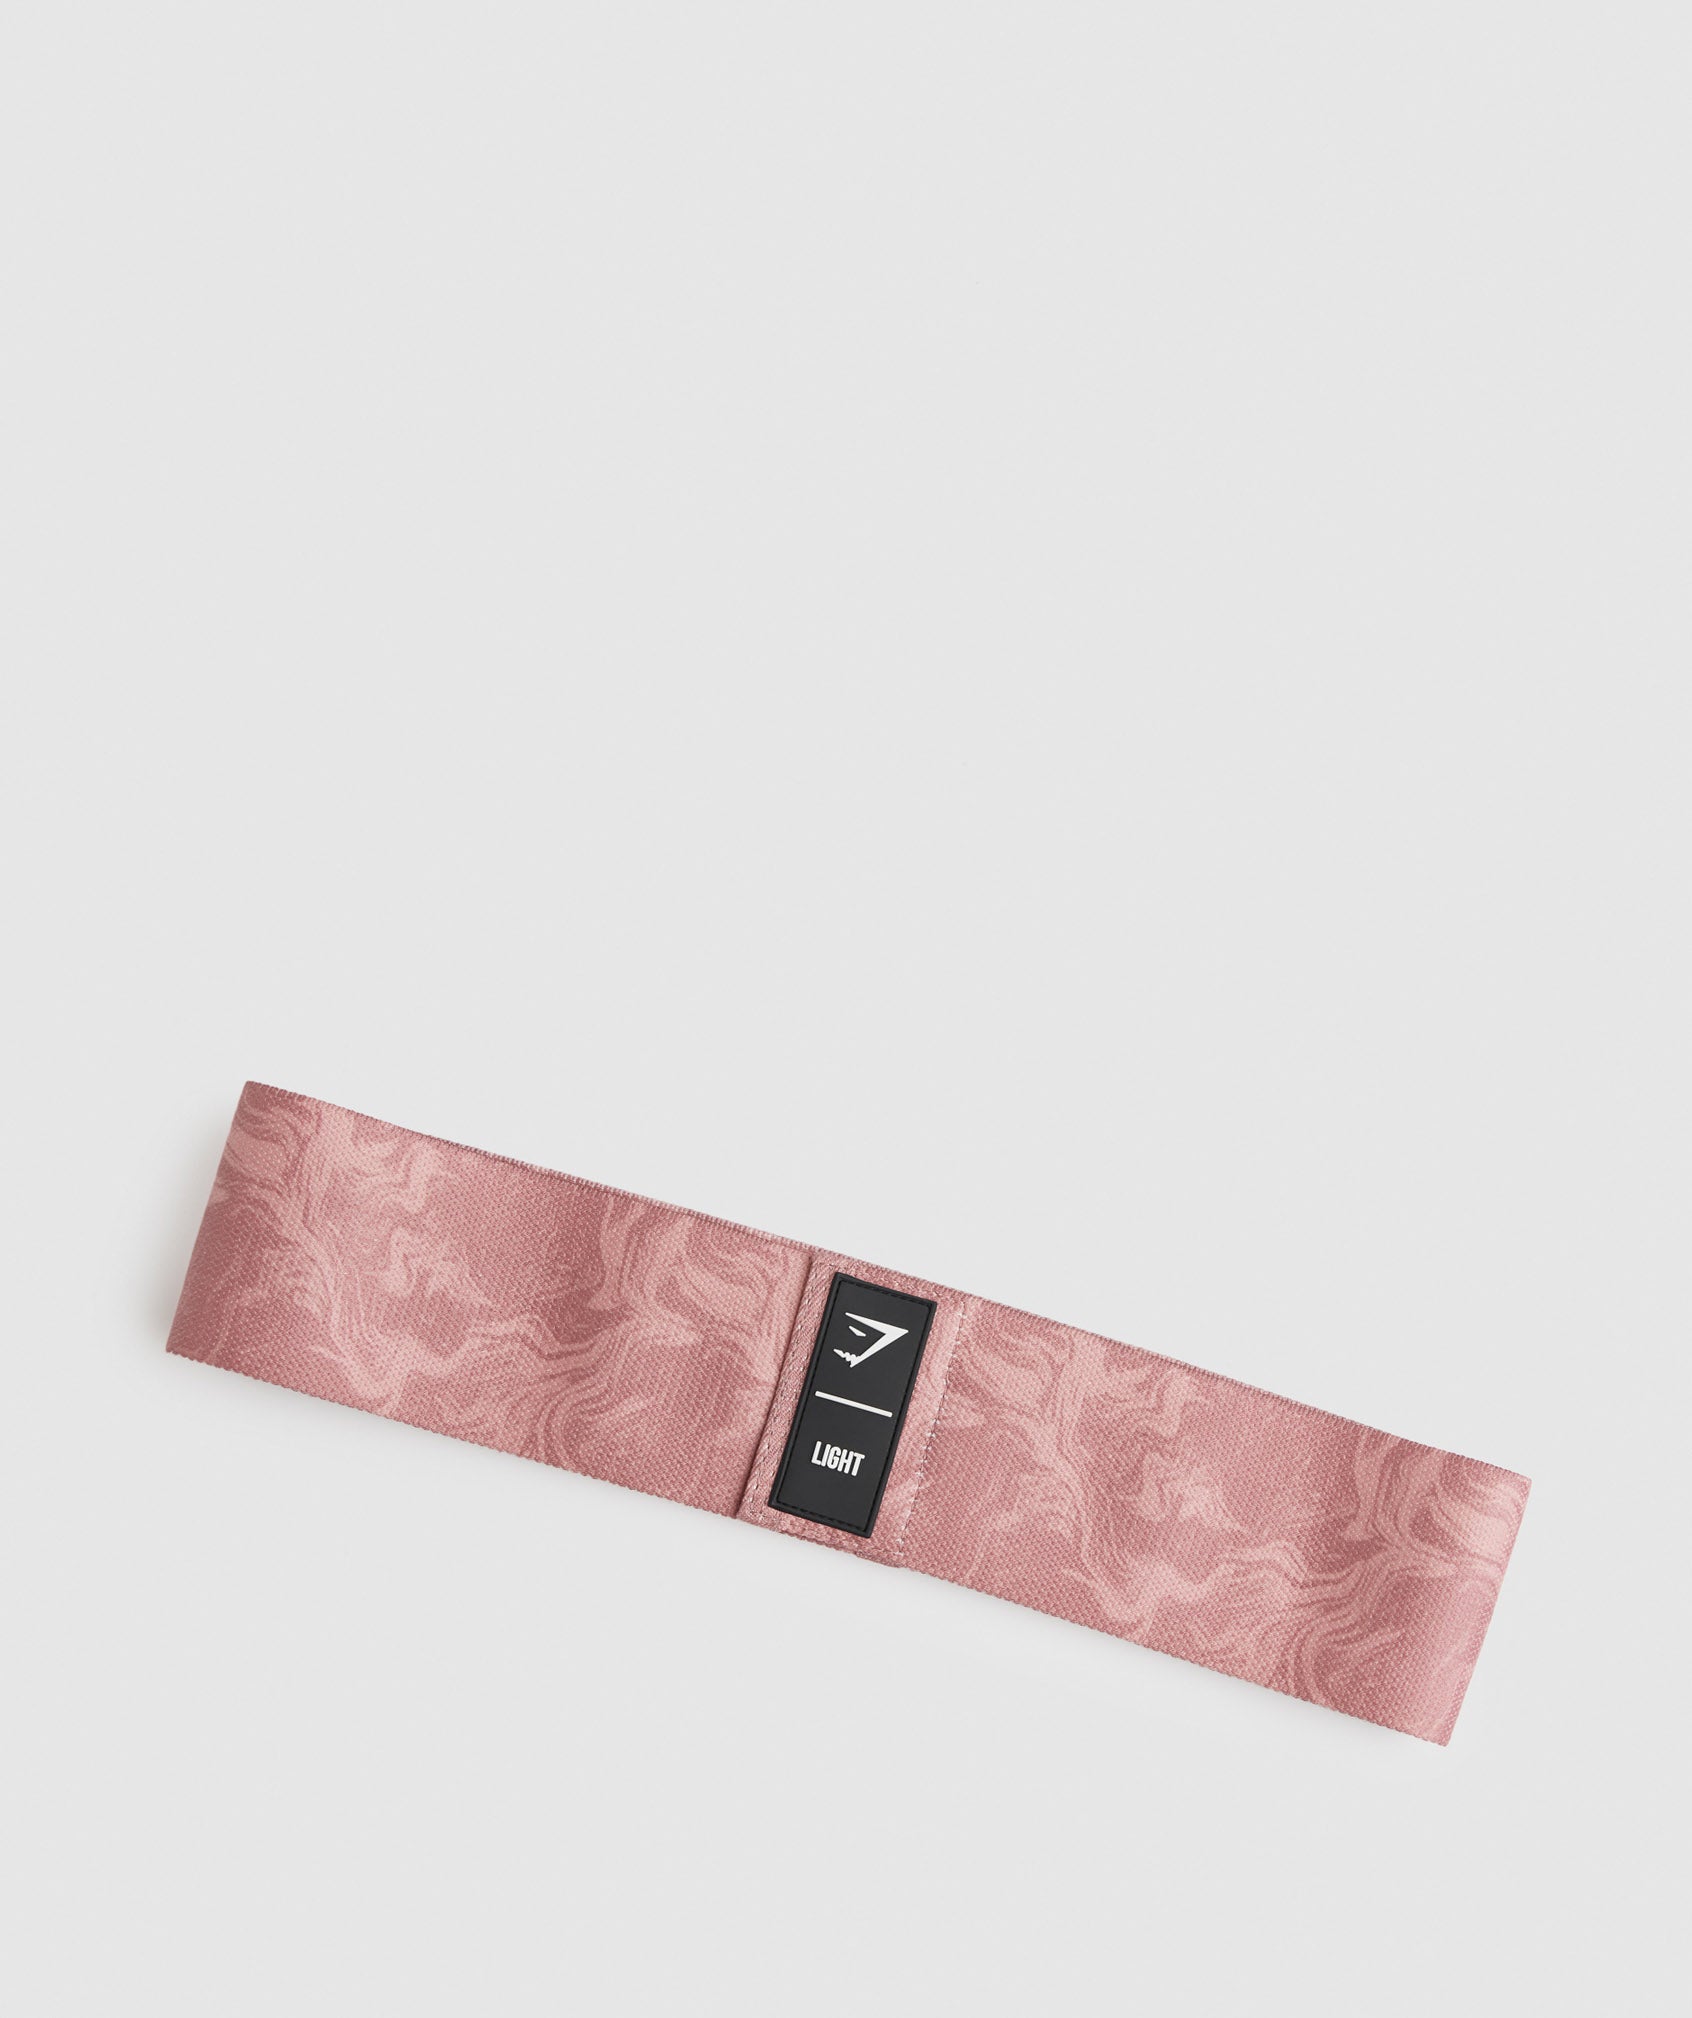 Light Glute Band in Alice Pink Print